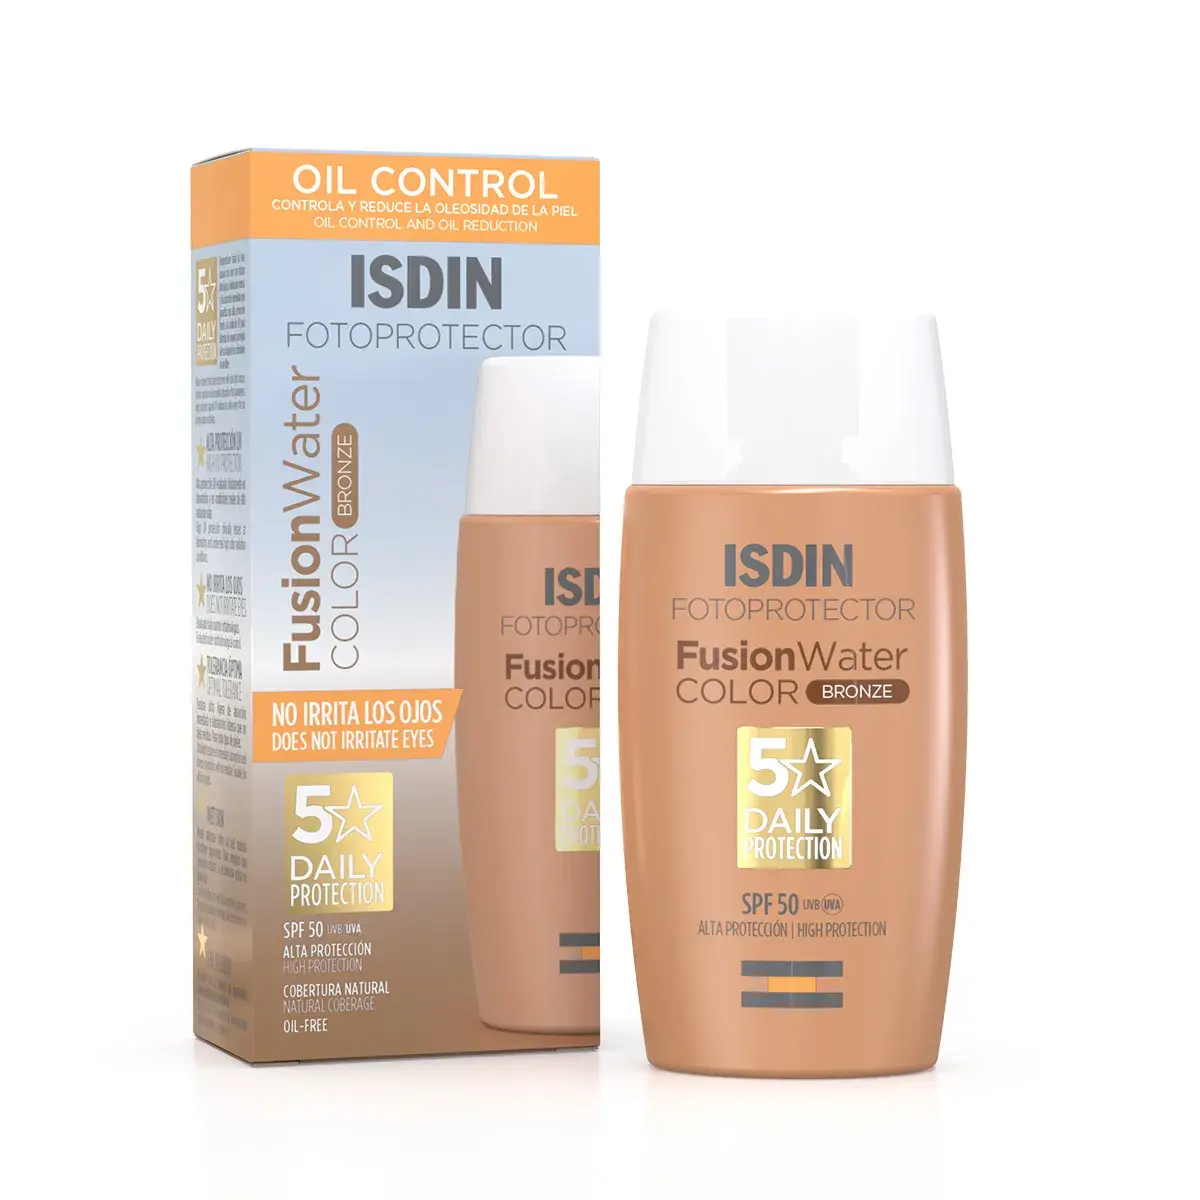 isdin fusion water color bronce guatemala